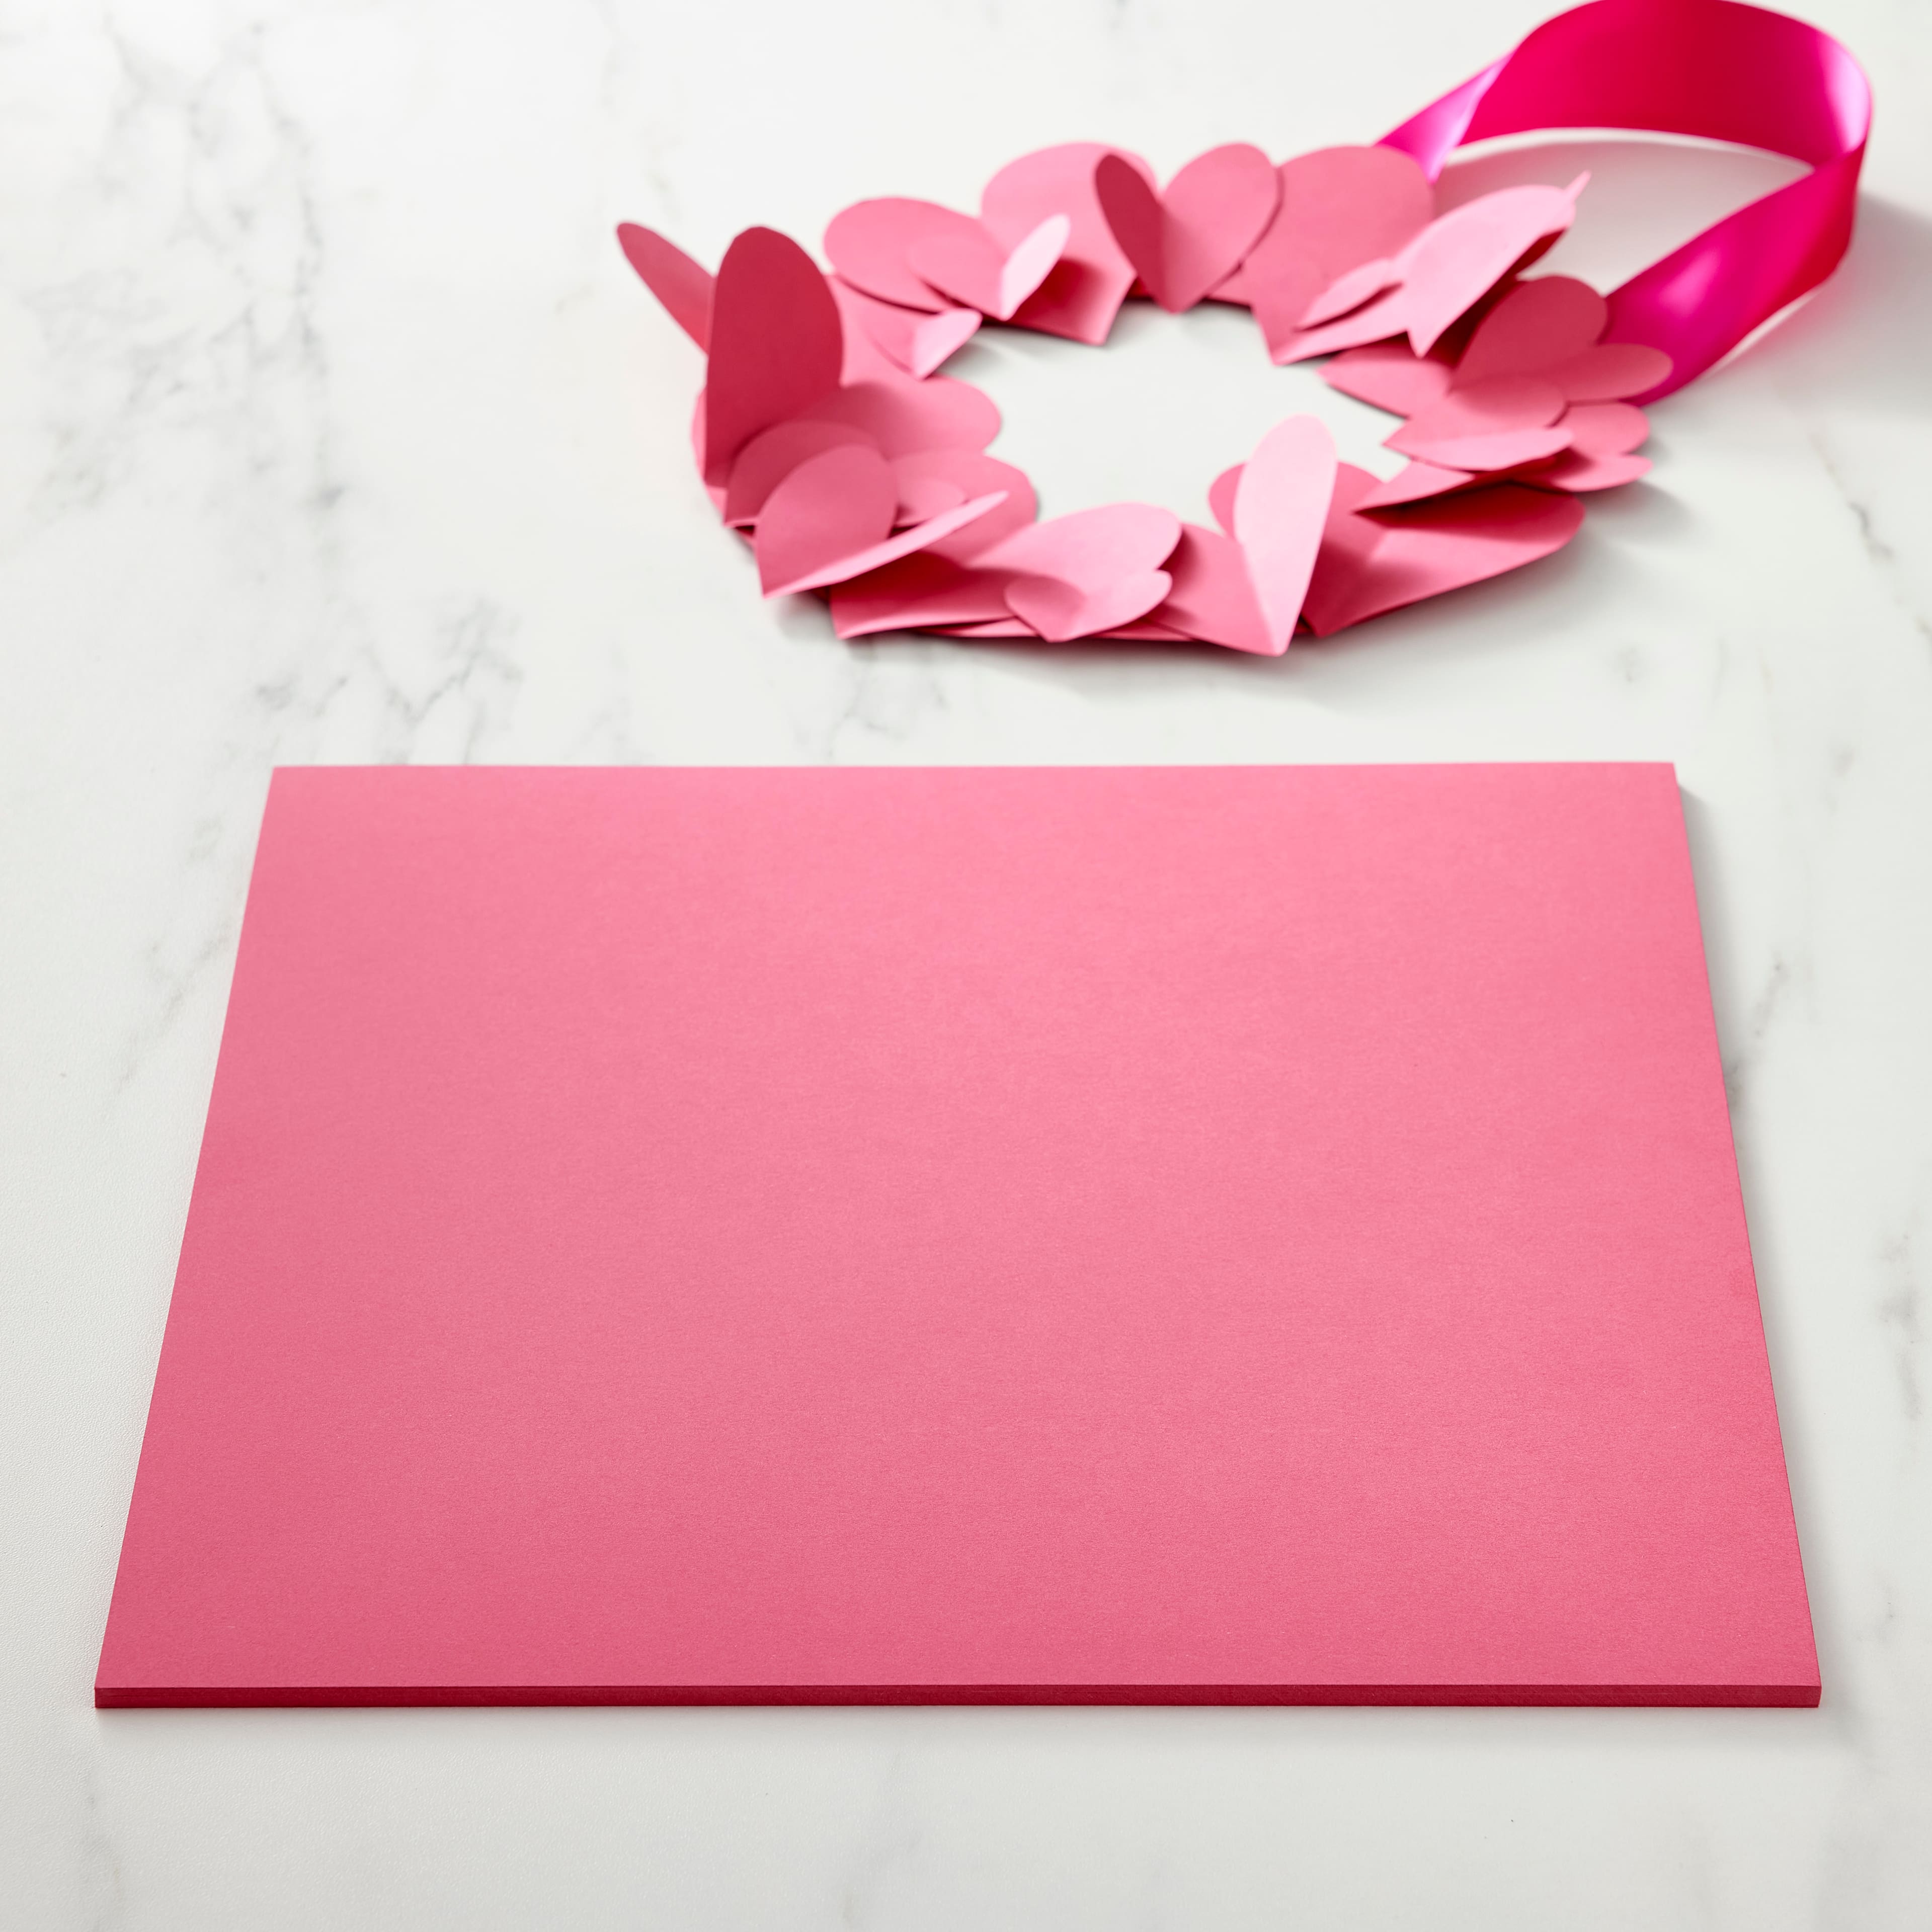 Michaels Bulk 12 Packs: 25 Ct. (300 Total) 12 inch x 12 inch Cardstock Paper by Recollections, Size: 12 x 12, Red